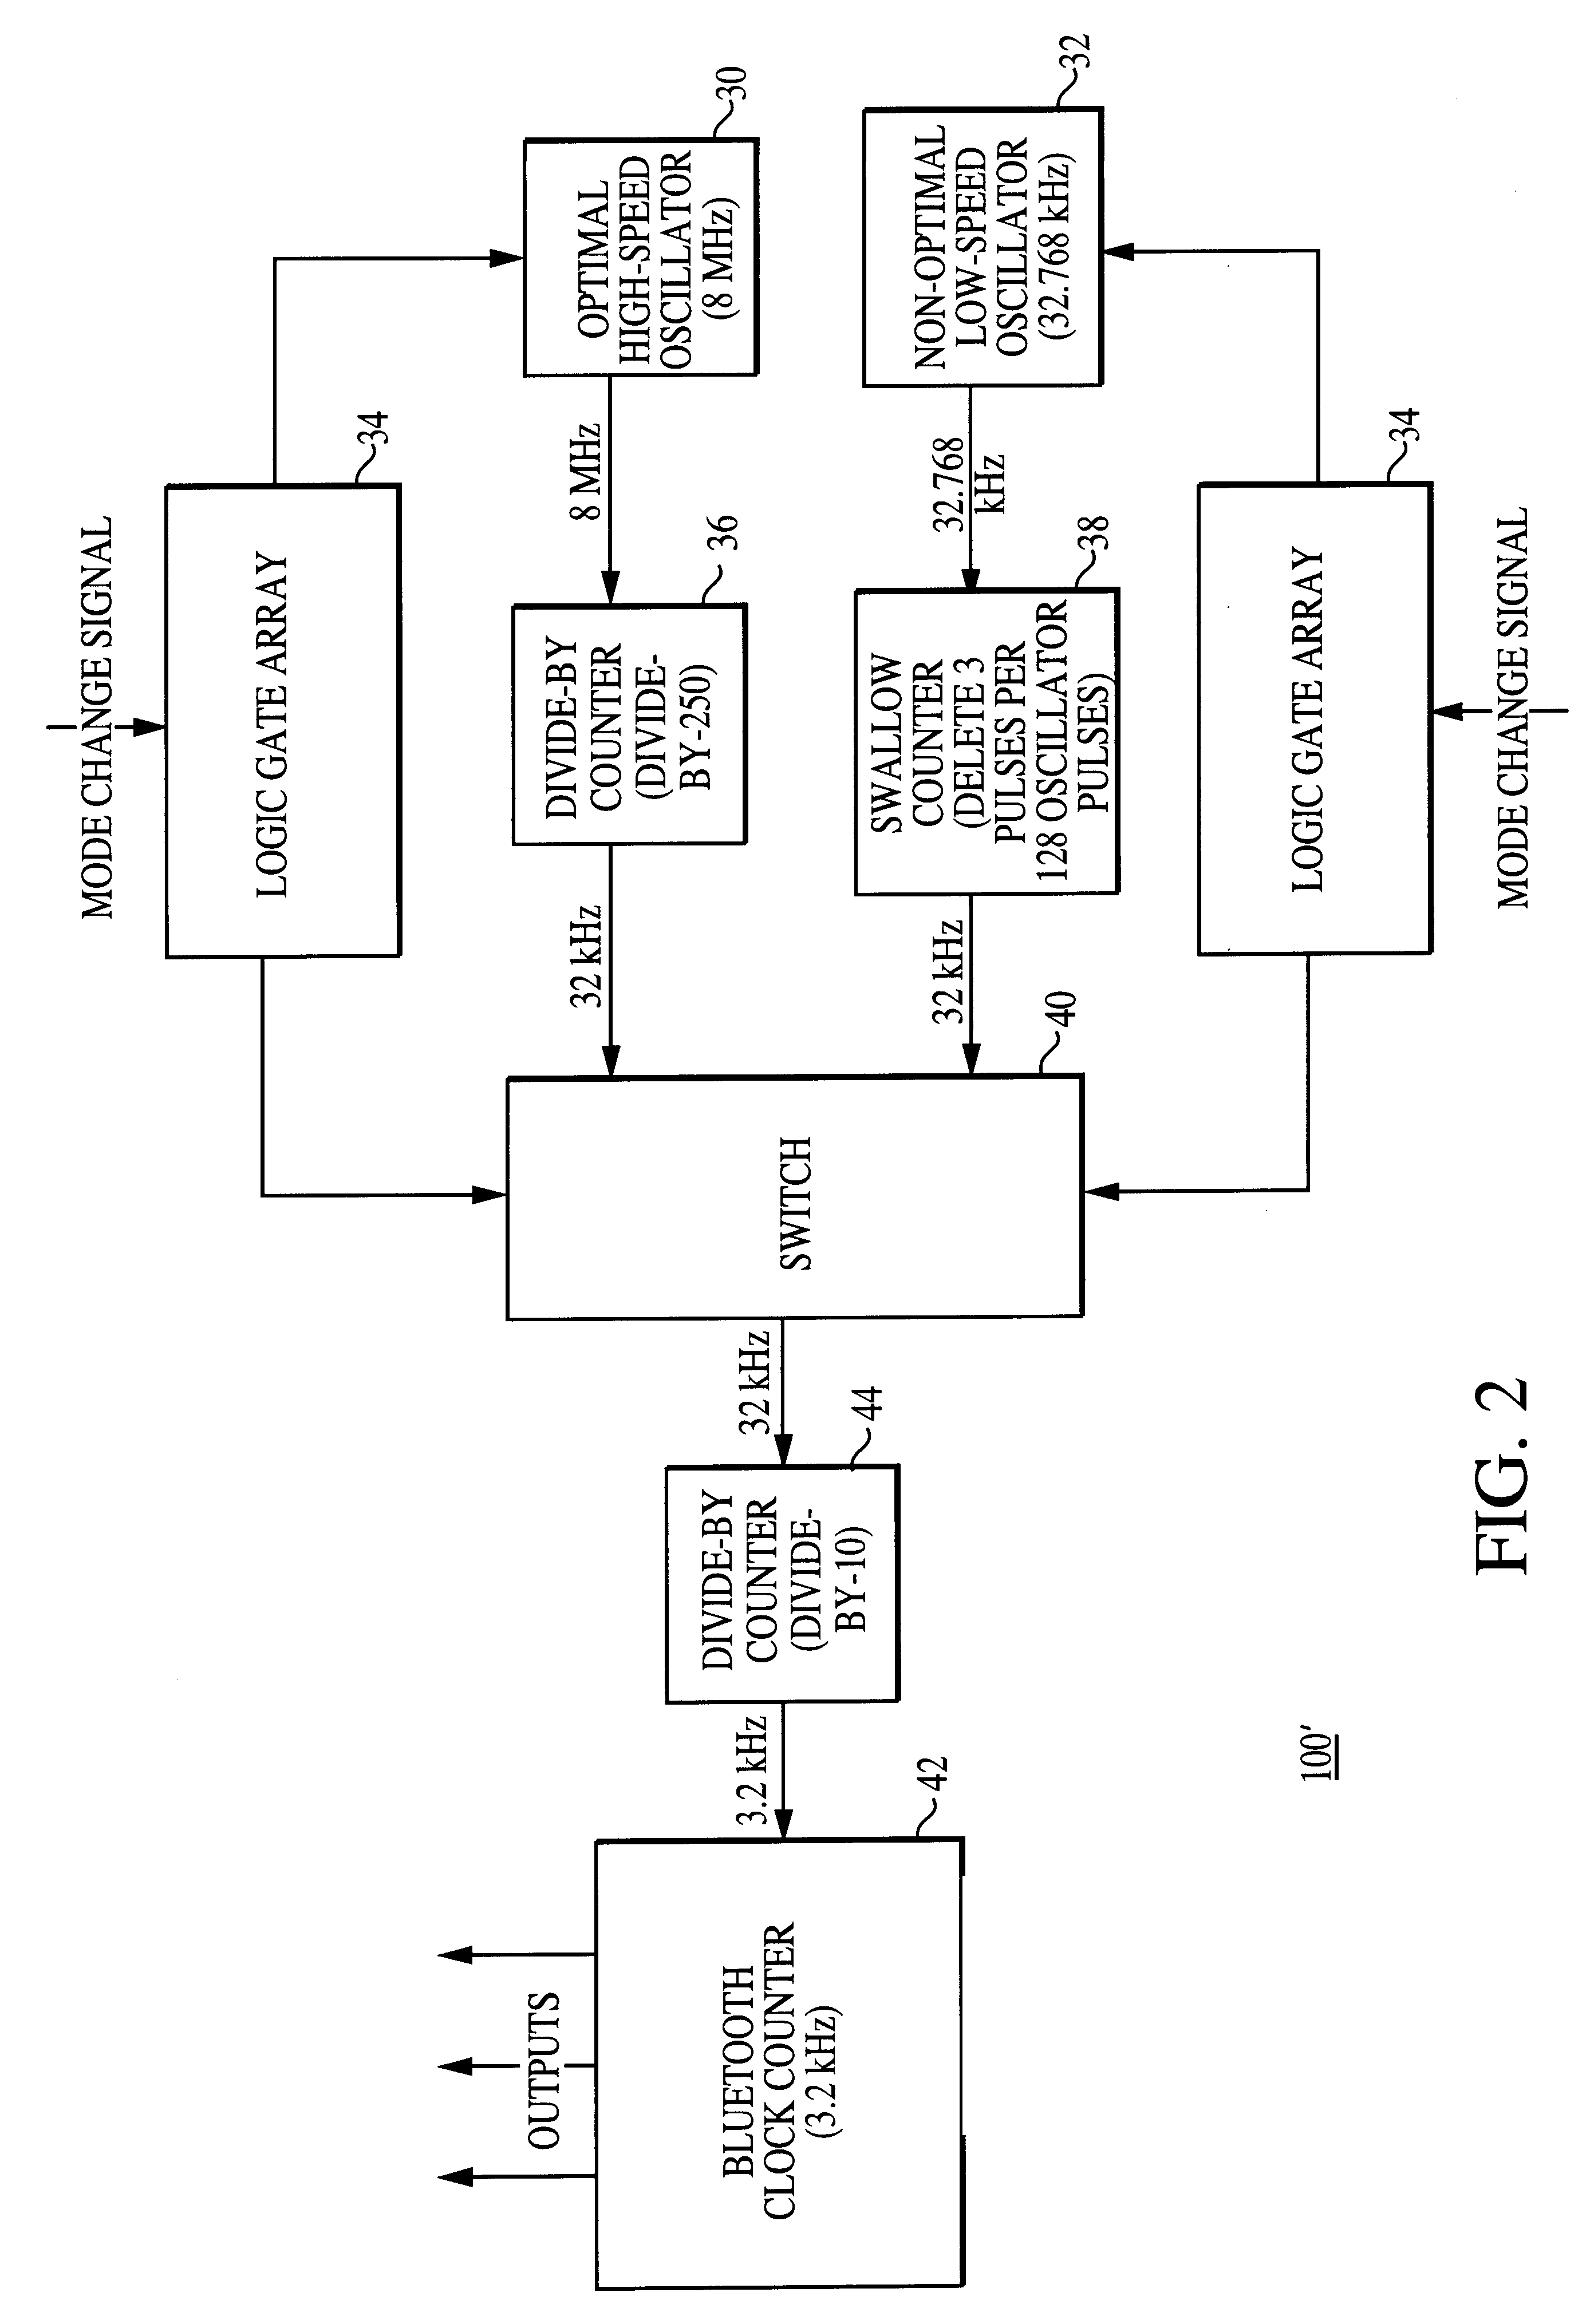 Method and apparatus for implementing a high-precision interval timer utilizing multiple oscillators including a non-optimal oscillator